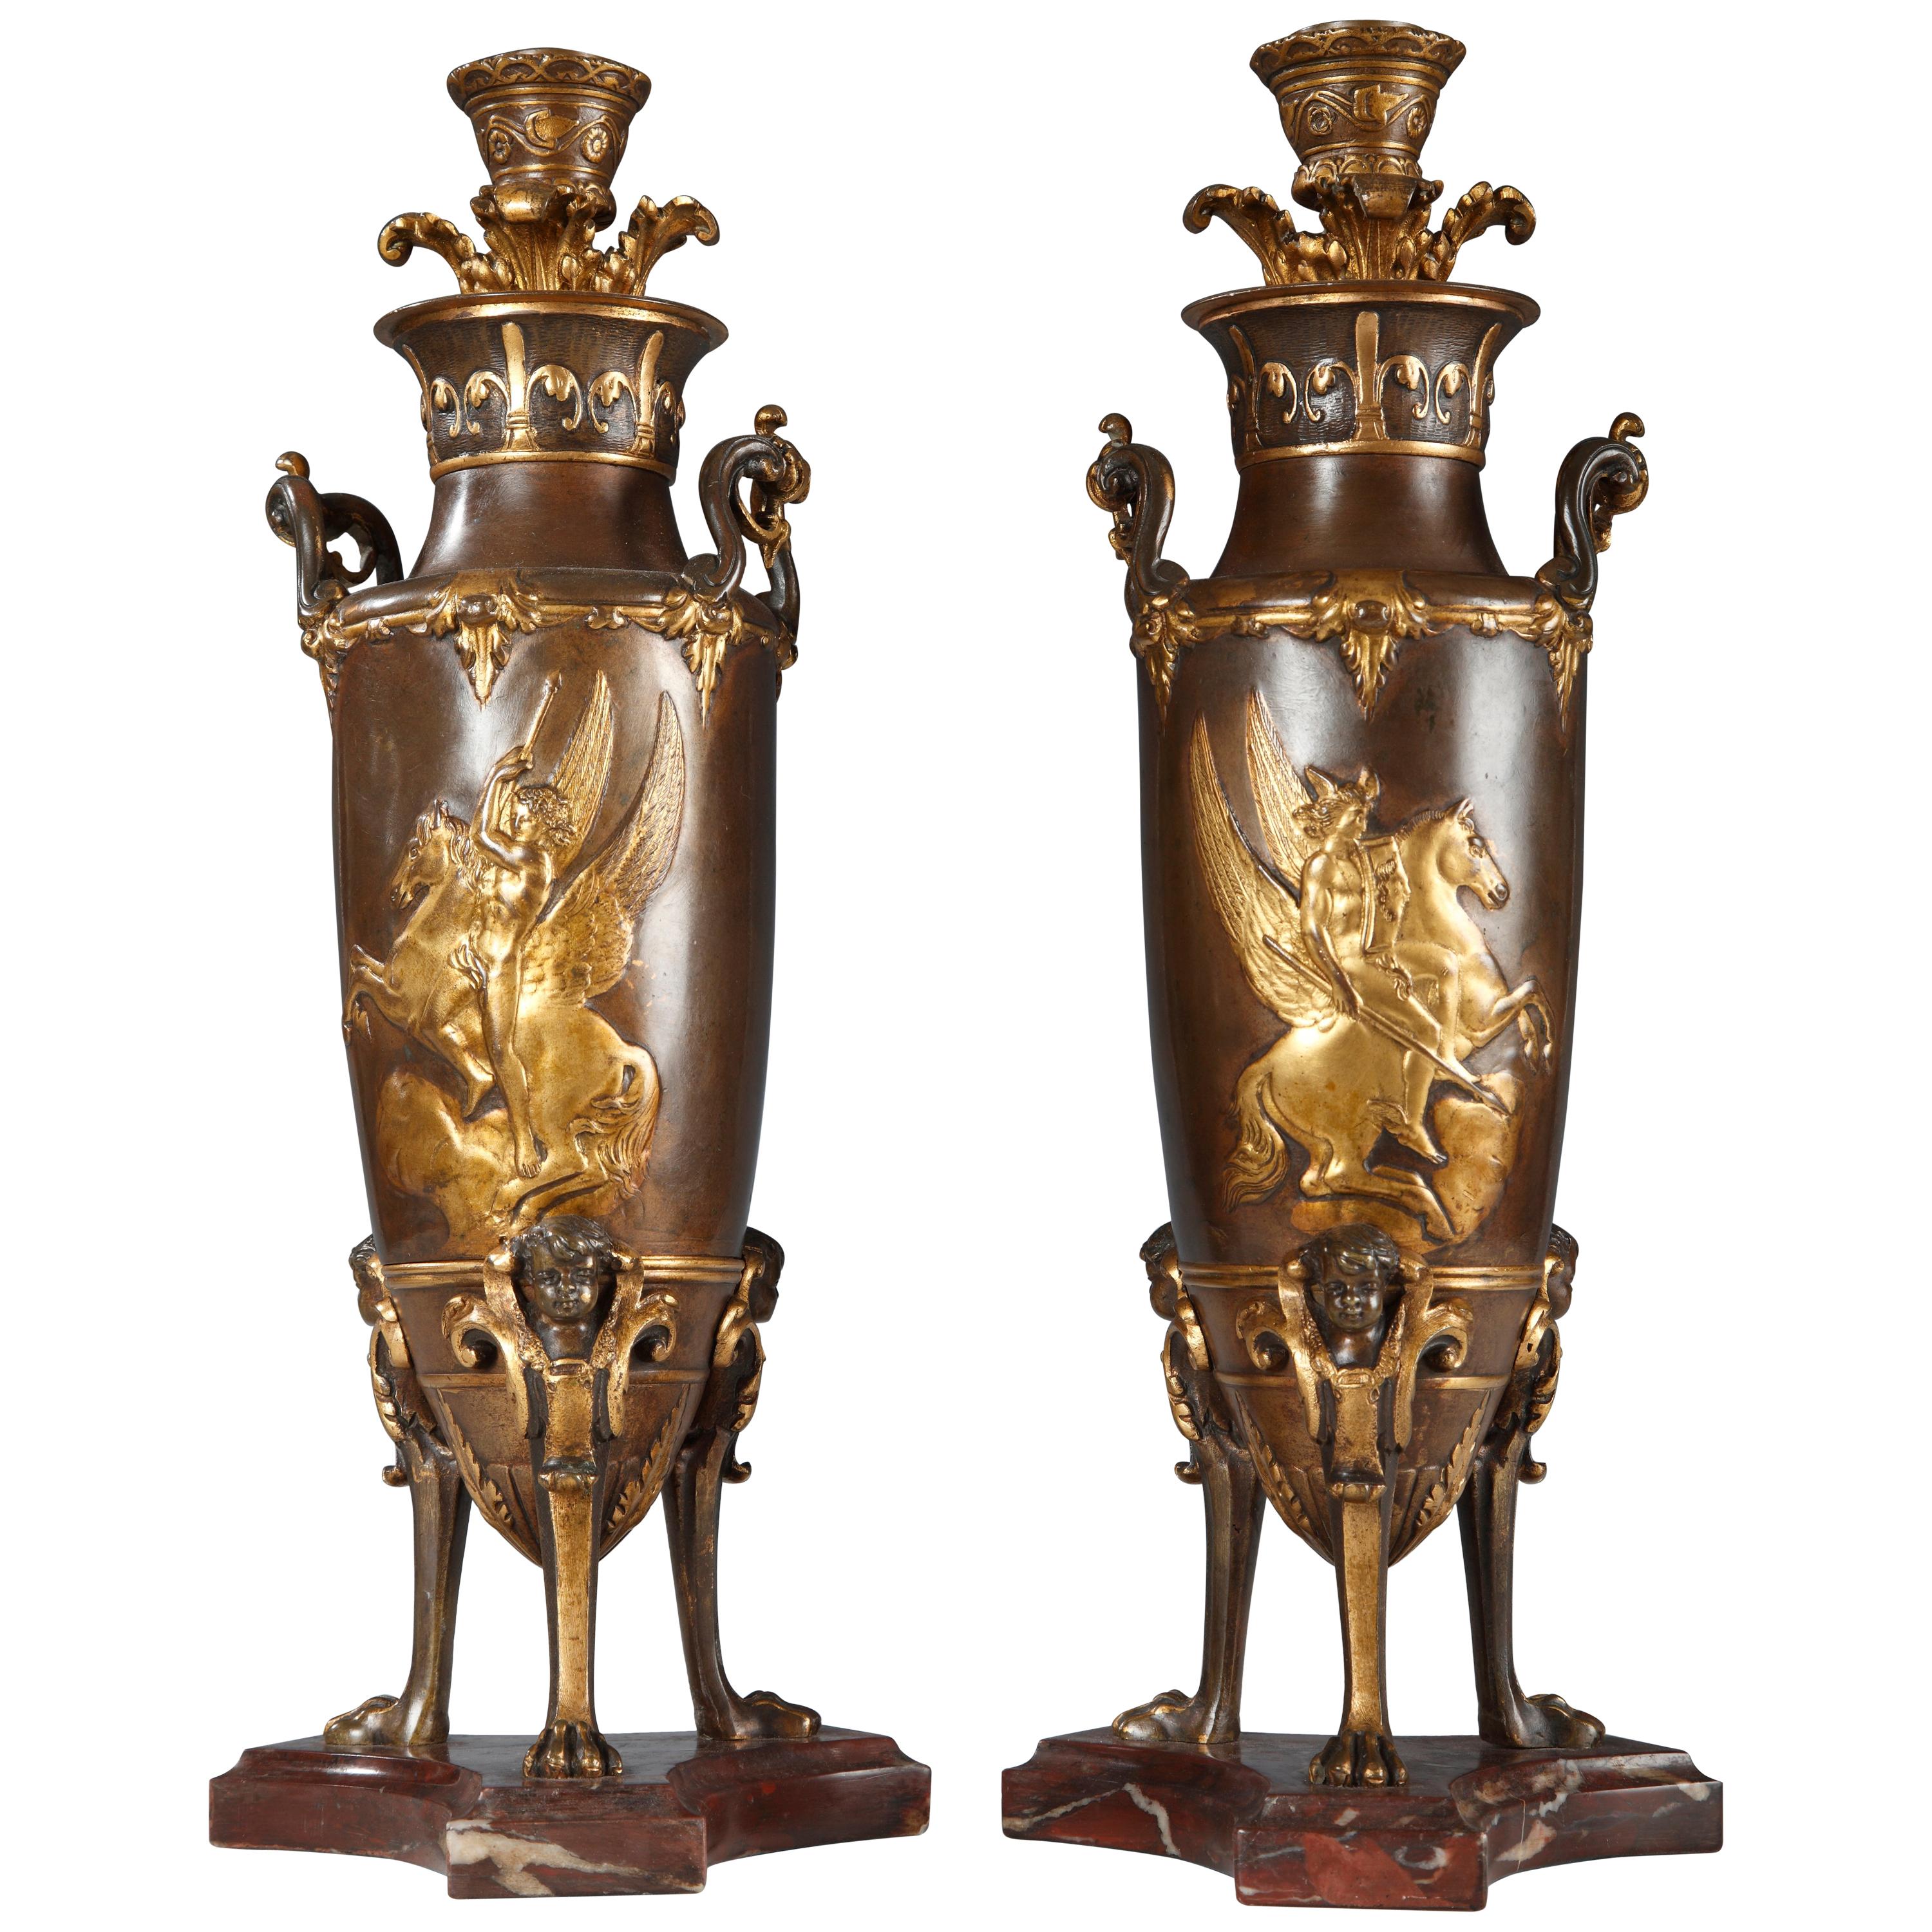 Pair of Neo-Greek Vase-Candlesticks Attr. to Barbedienne and Levillain, c. 1880 For Sale